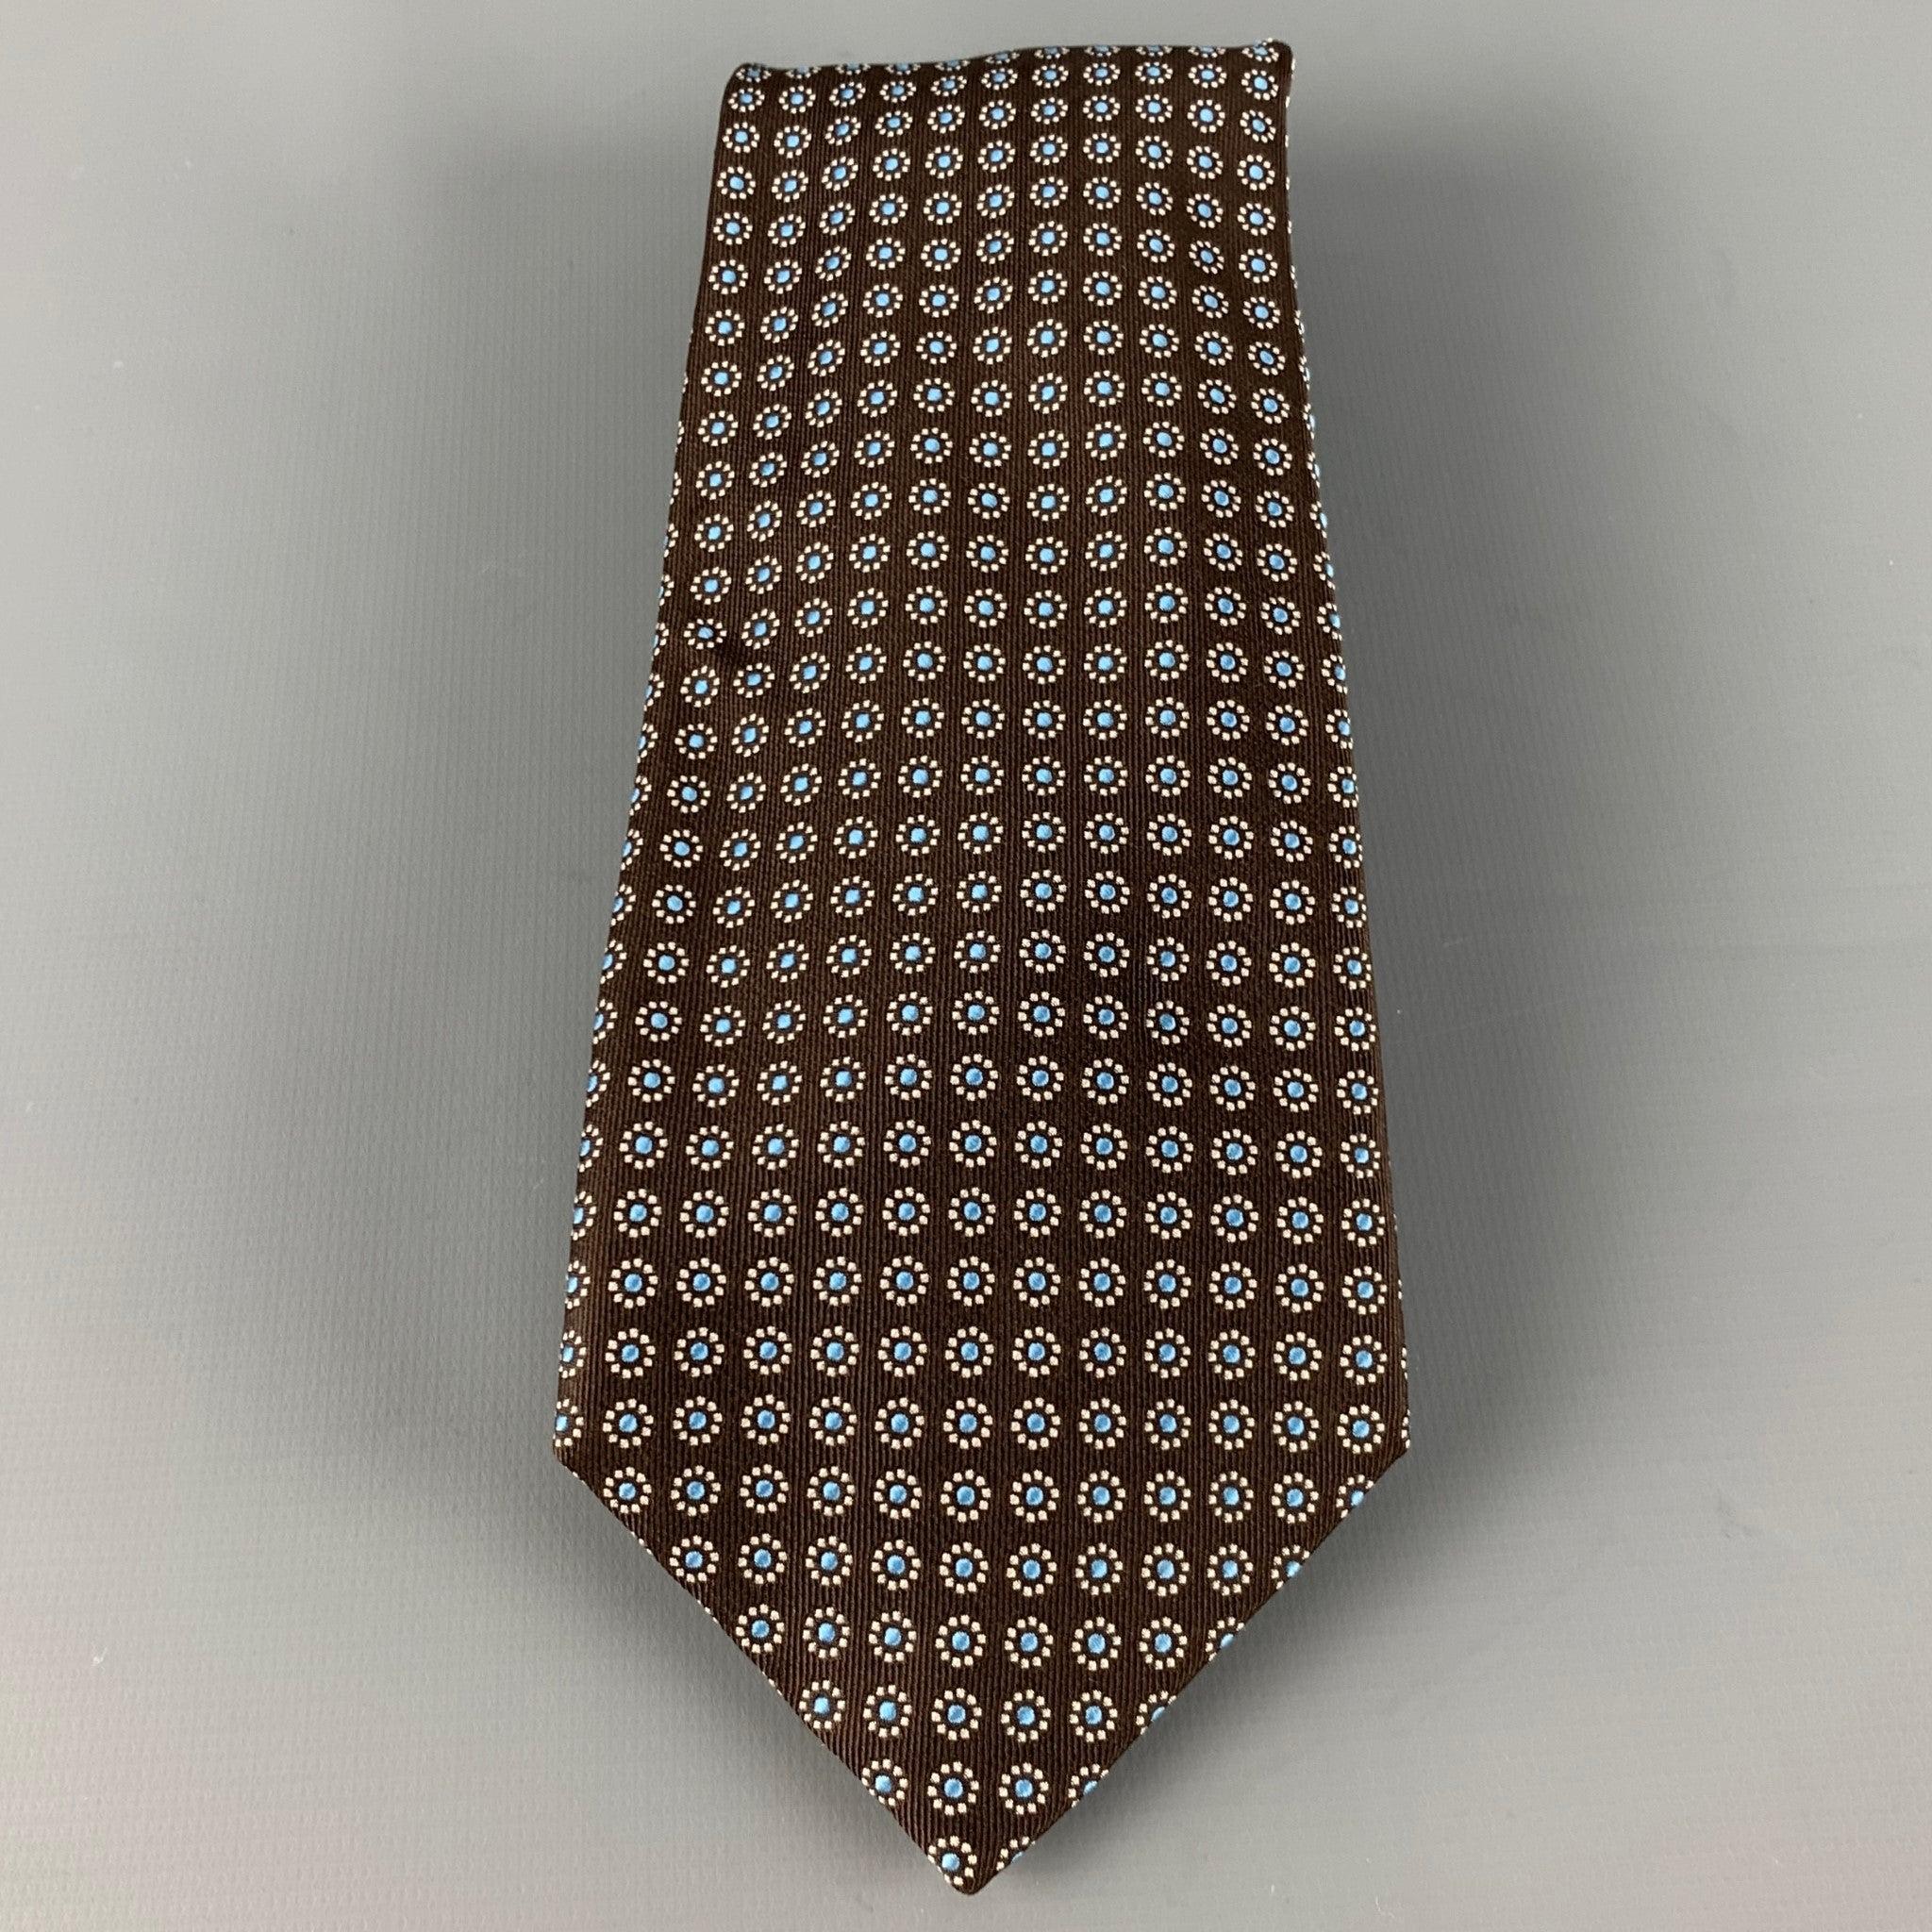 BARNEY'S NEW YORK
tie in brown silk, featuring a white and light blue abstract floral pattern. Handmade in Italy.Very Good Pre-Owned Condition. 

Measurements: 
  Width: 3.5 inches Length: 61 inches 
  
  
 
Reference: 126588
Category: Tie
More